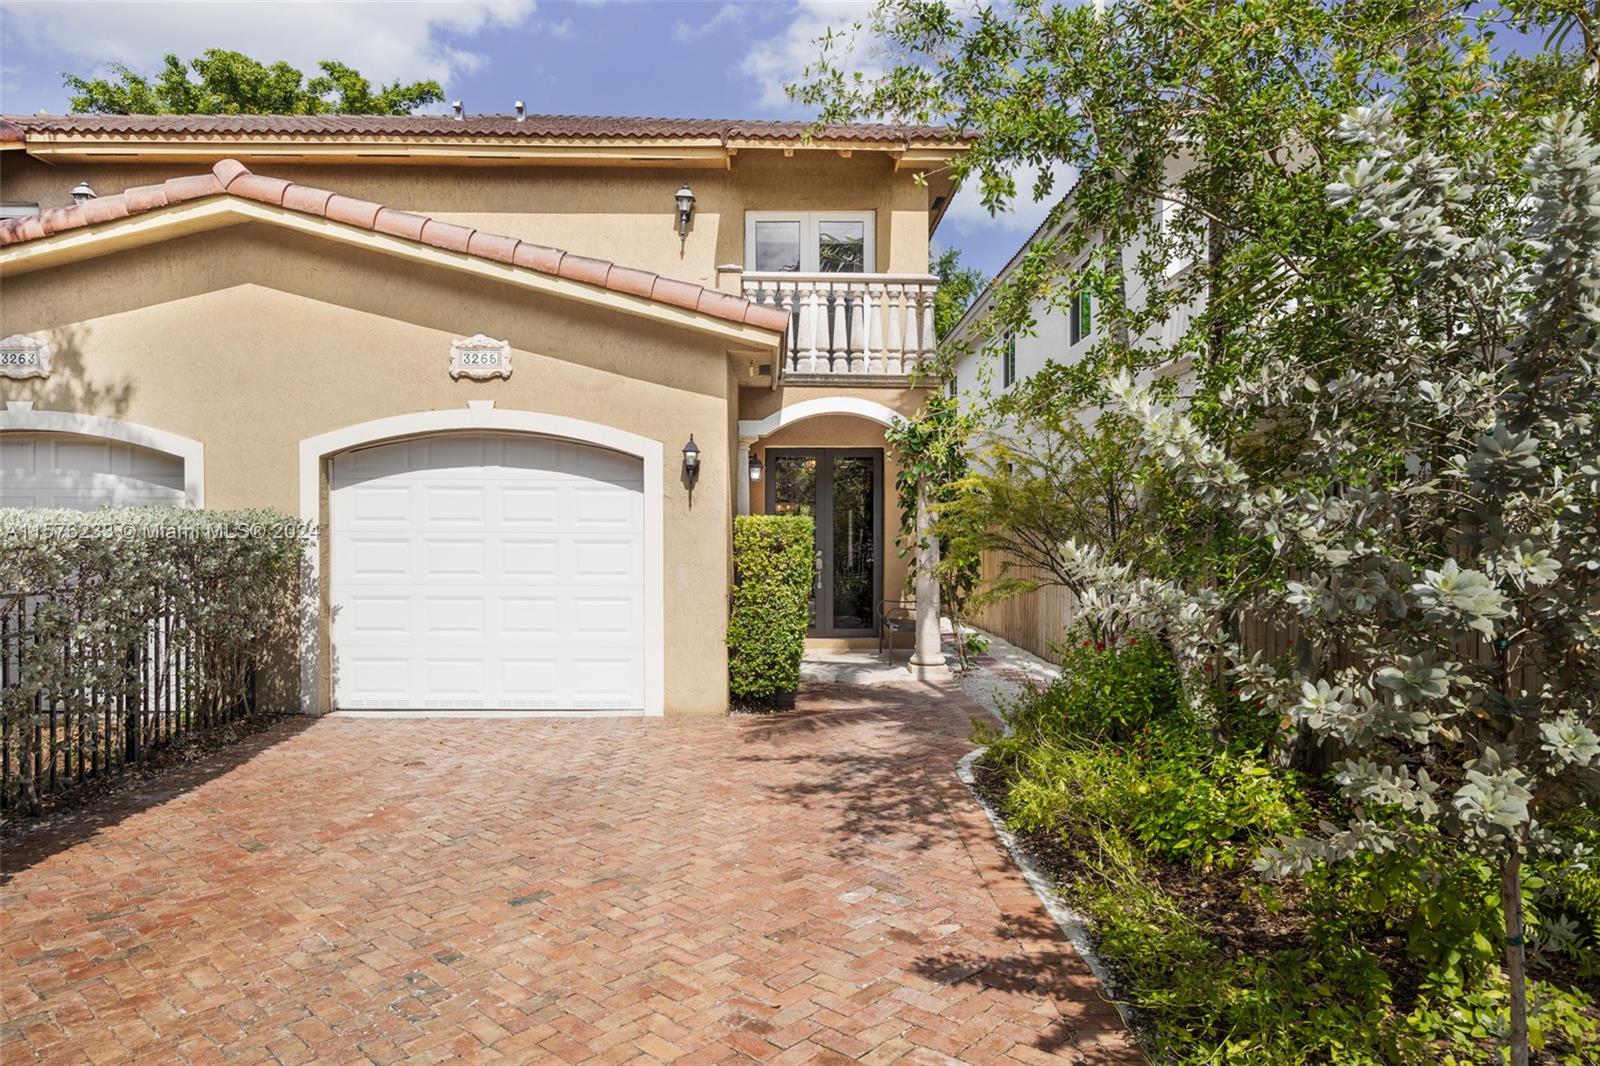 View Coconut Grove, FL 33133 townhome